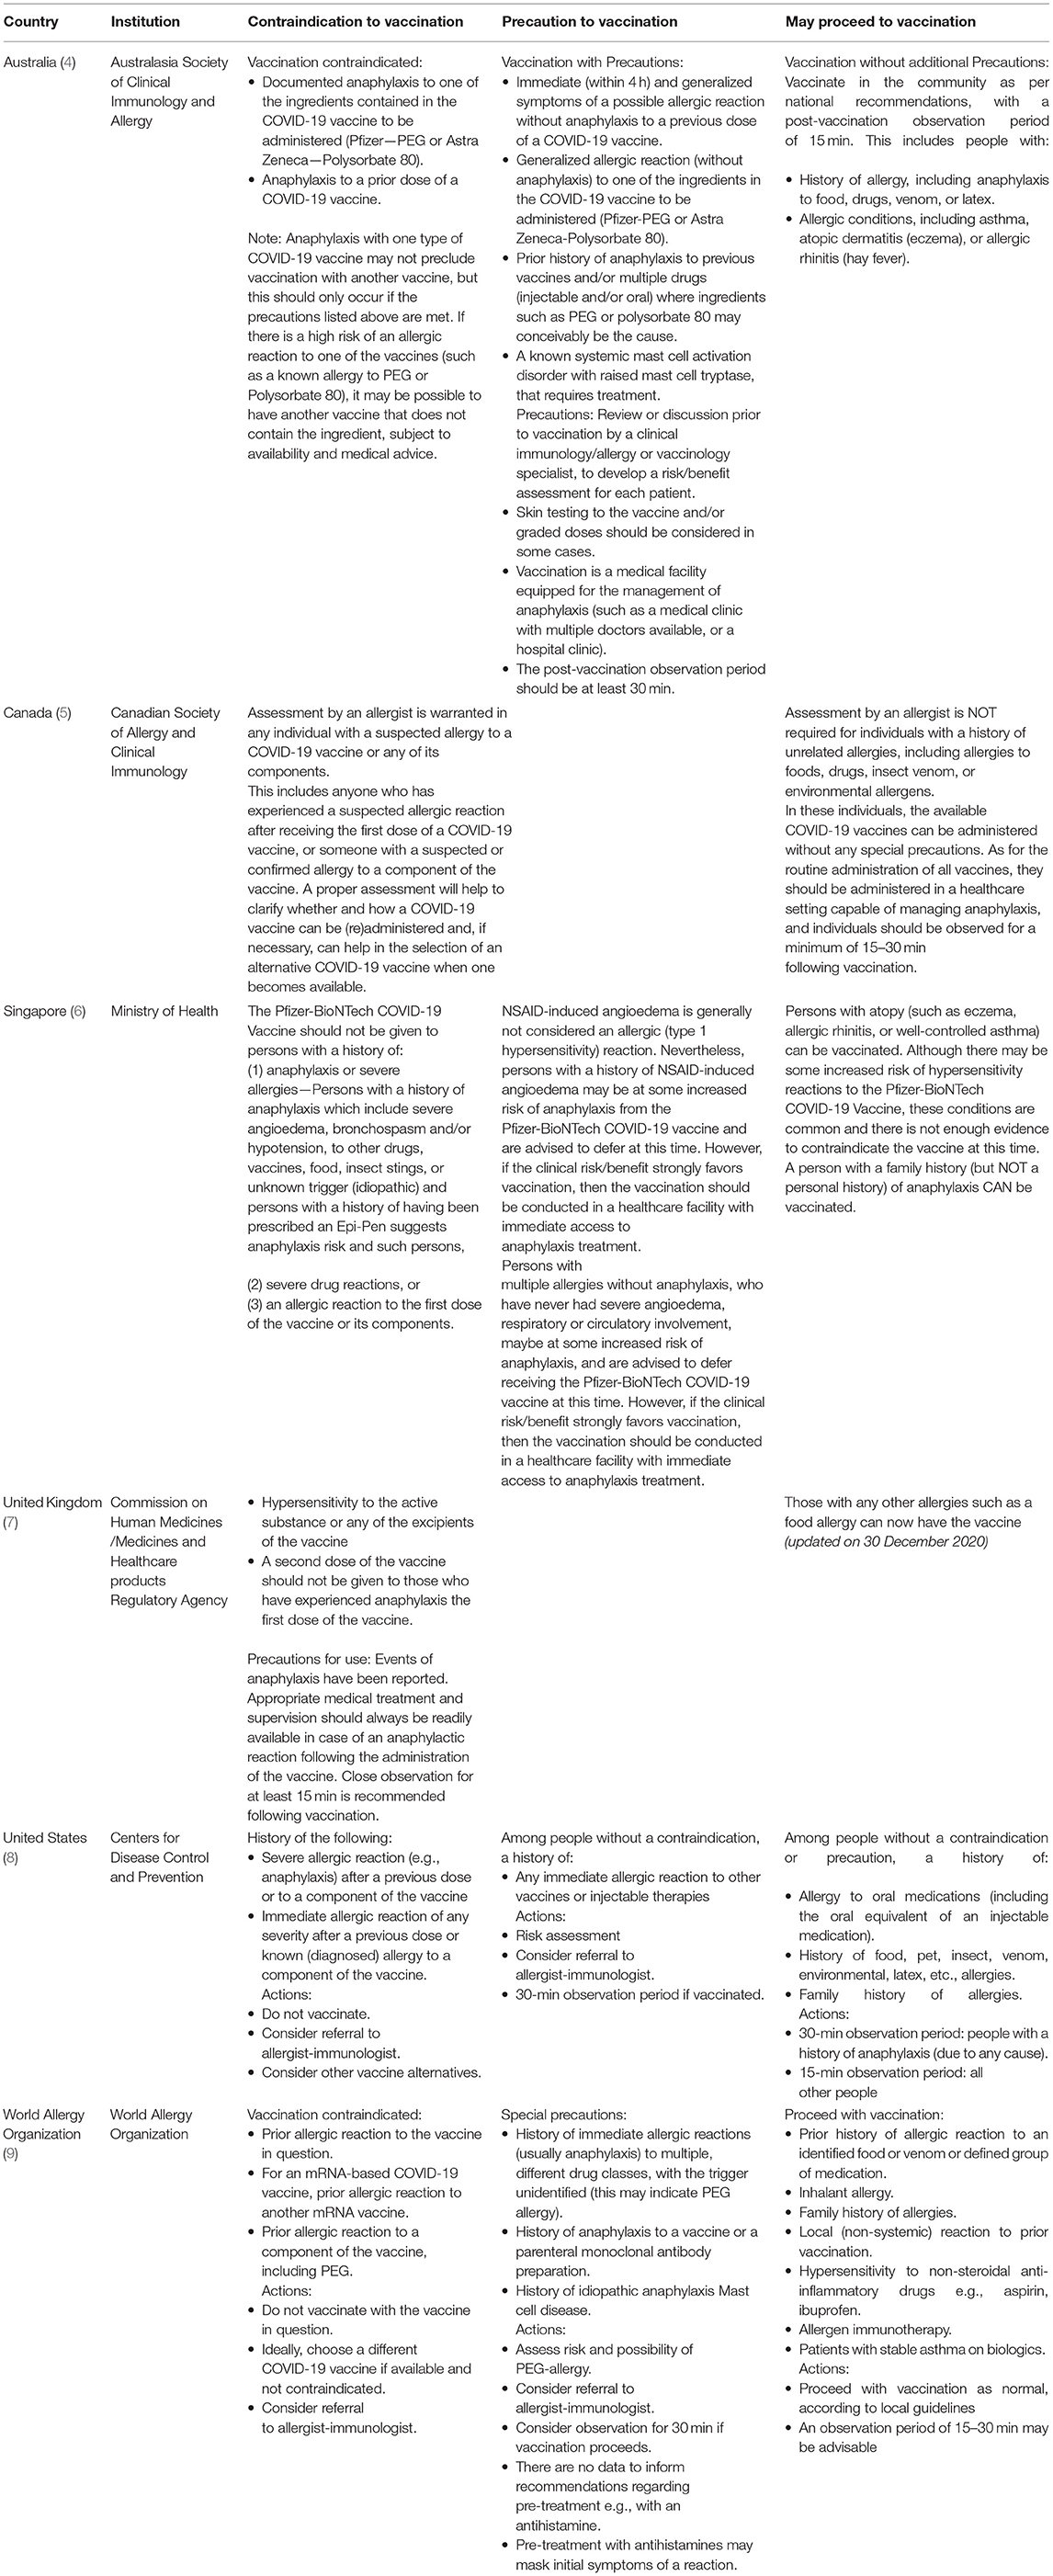 Frontiers | Consensus Statements on the to COVID-19 Vaccine Allergy in Hong Kong Allergy